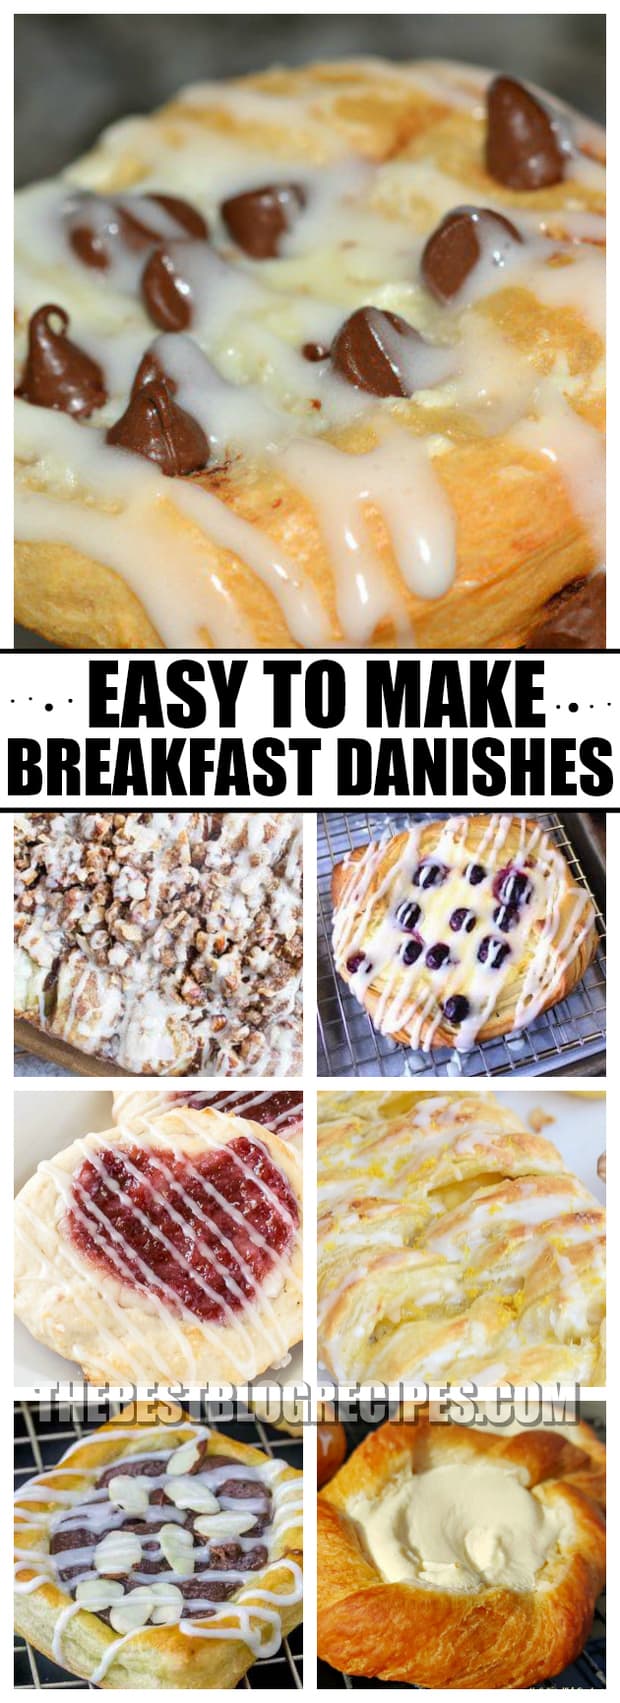 We all need Easy to Make Breakfast Danishes to Start Mornings off Right. Seriously, everyone needs a morning boost, and these delectable danishes are the way to kick off your day in the best possible way!